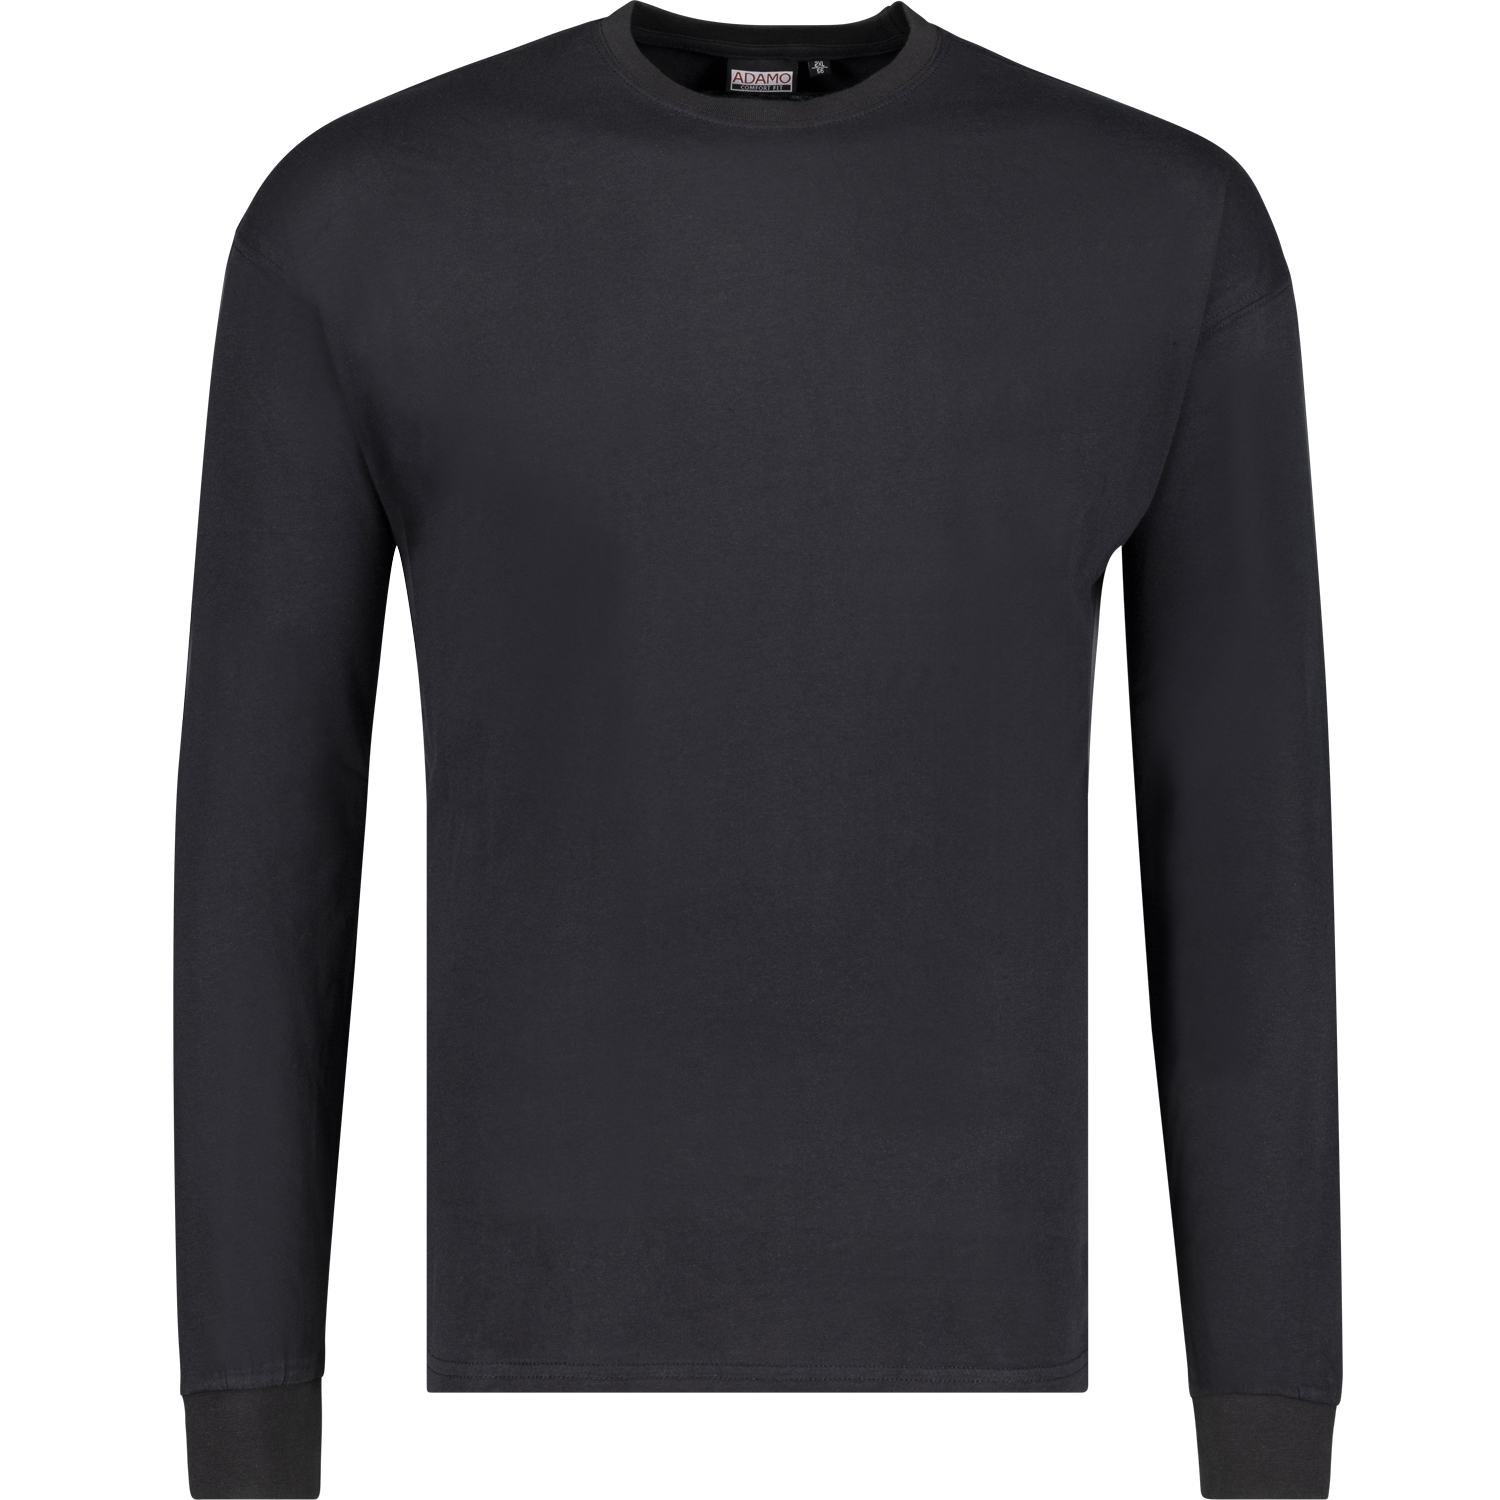 Longsleeve for men COMFORT FIT in black by ADAMO in size 2XL up to oversize 12XL